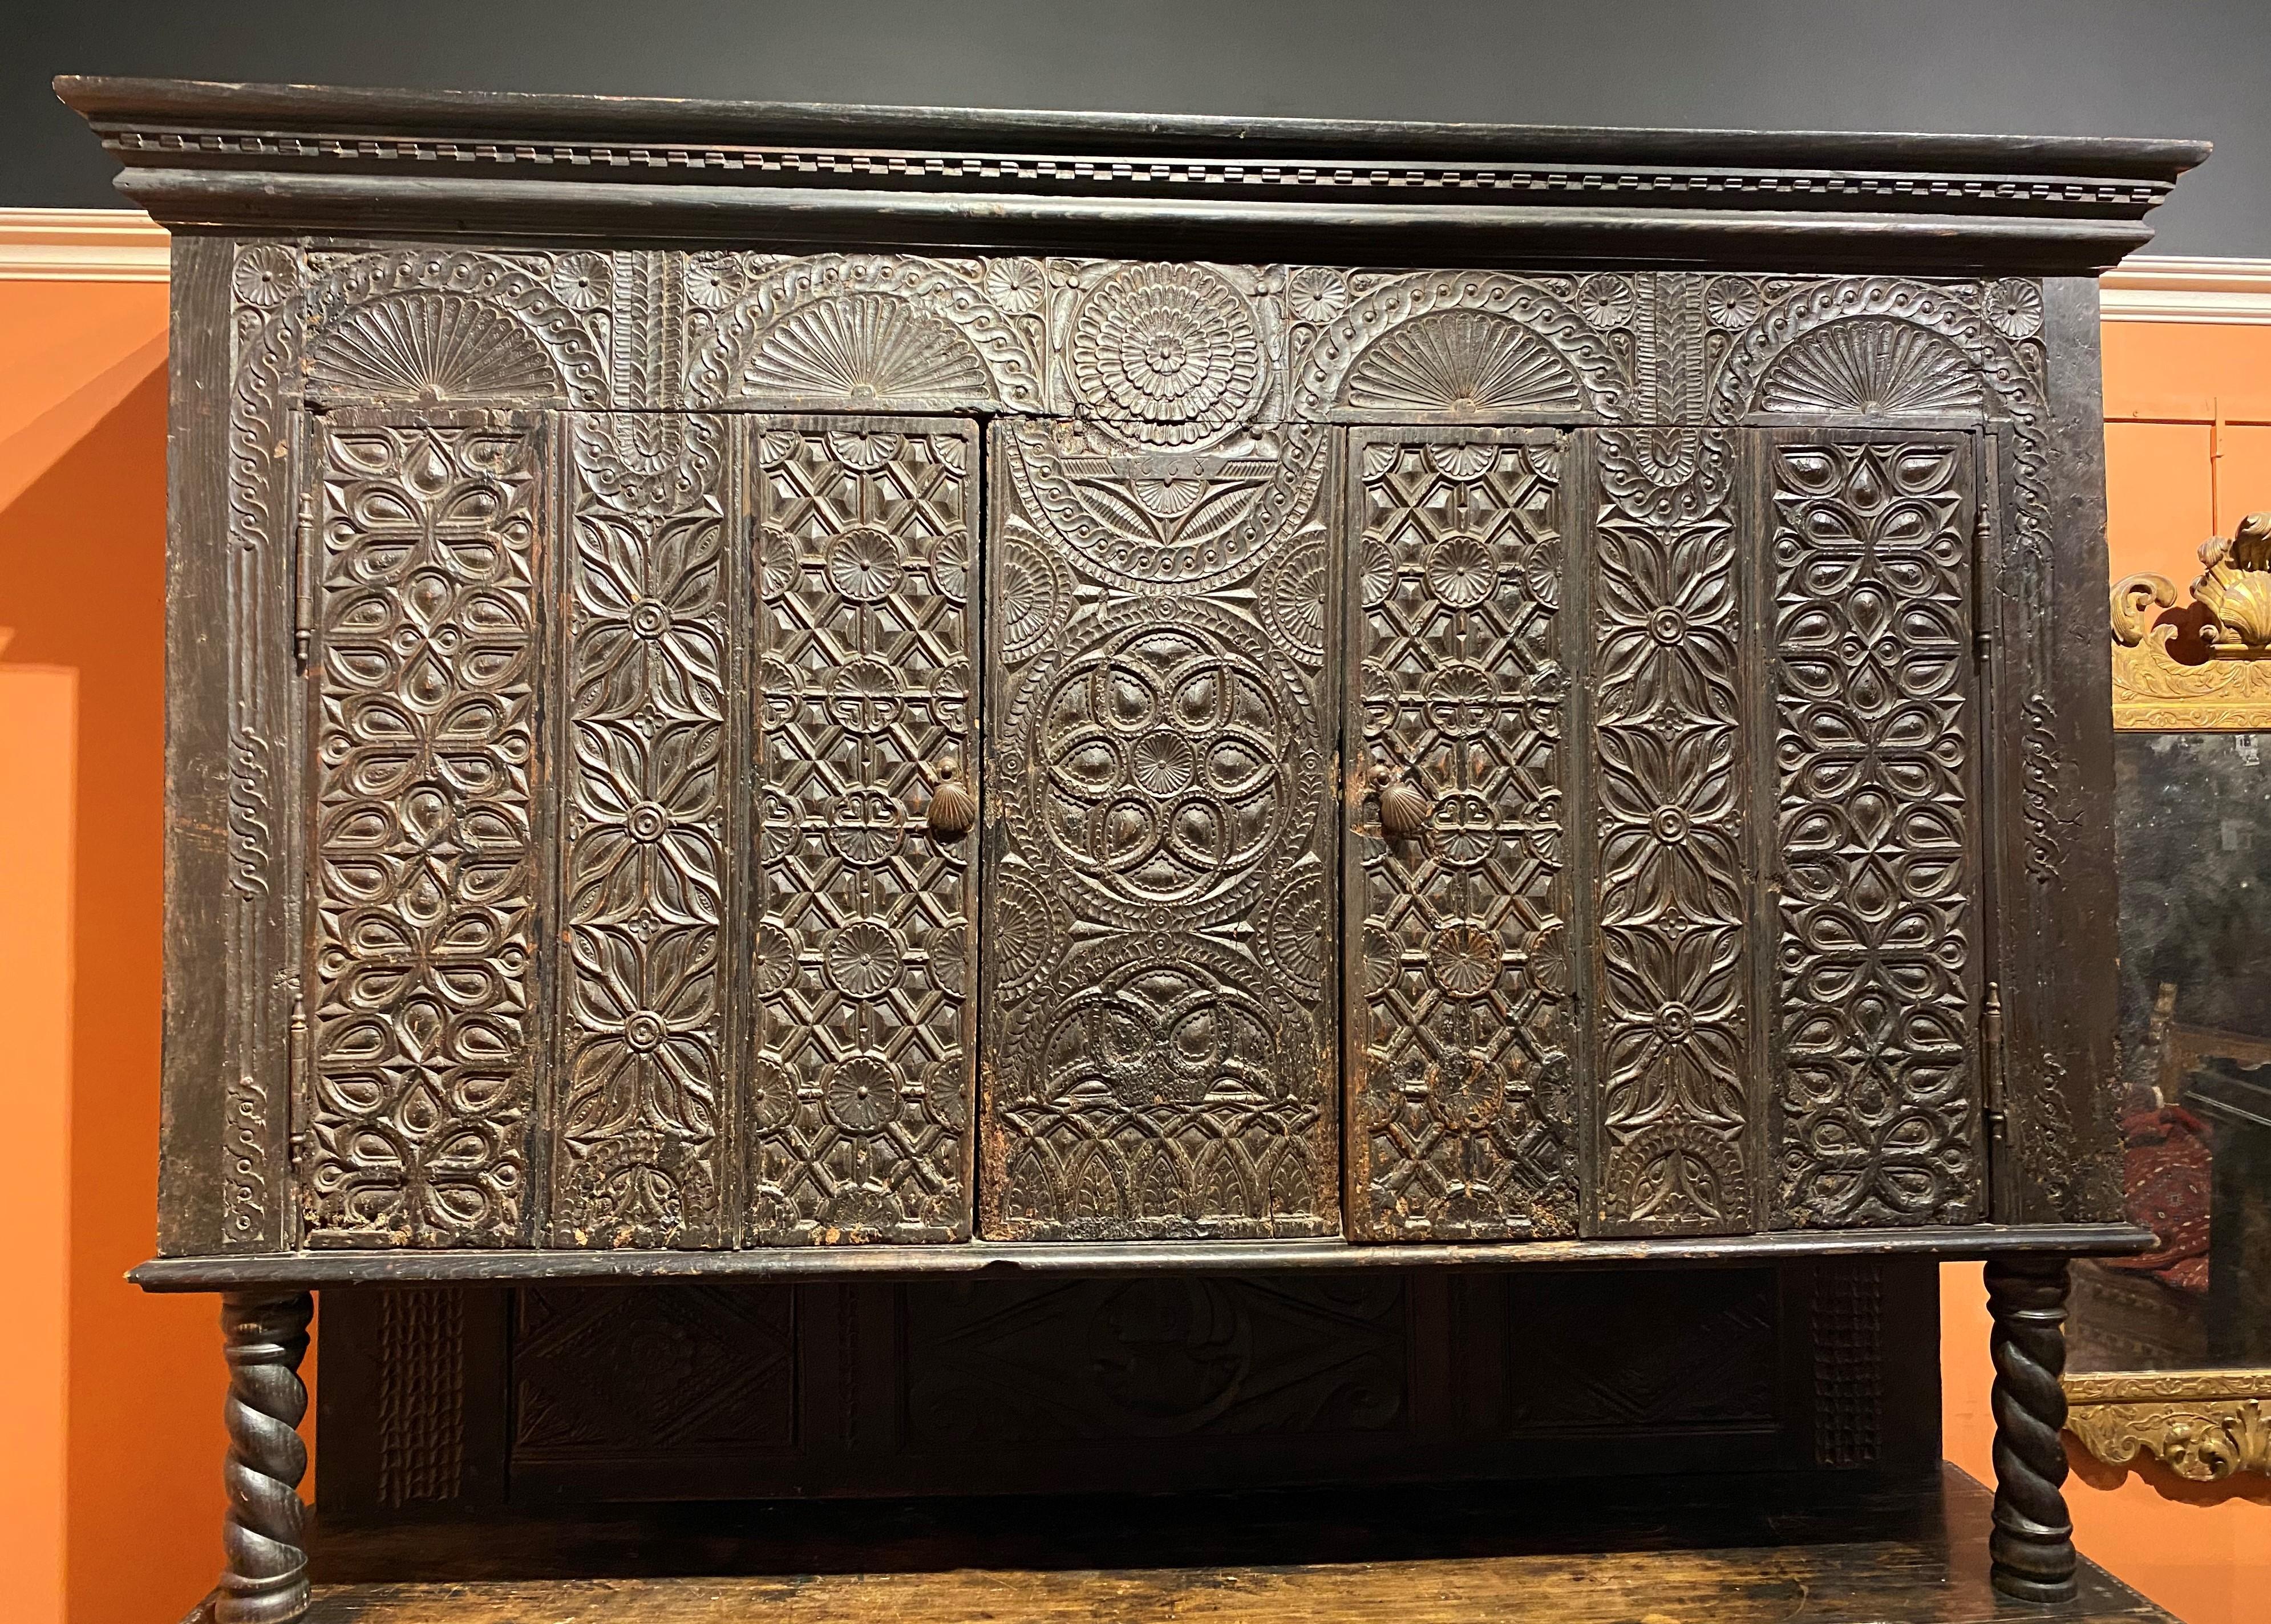 A splendid 17th century Continental two-part cupboard, its upper case with molded cornice with dentil molding, two carved doors opening to single interior shelves on each side, the fronts carved with geometric and arched relief designs, over a